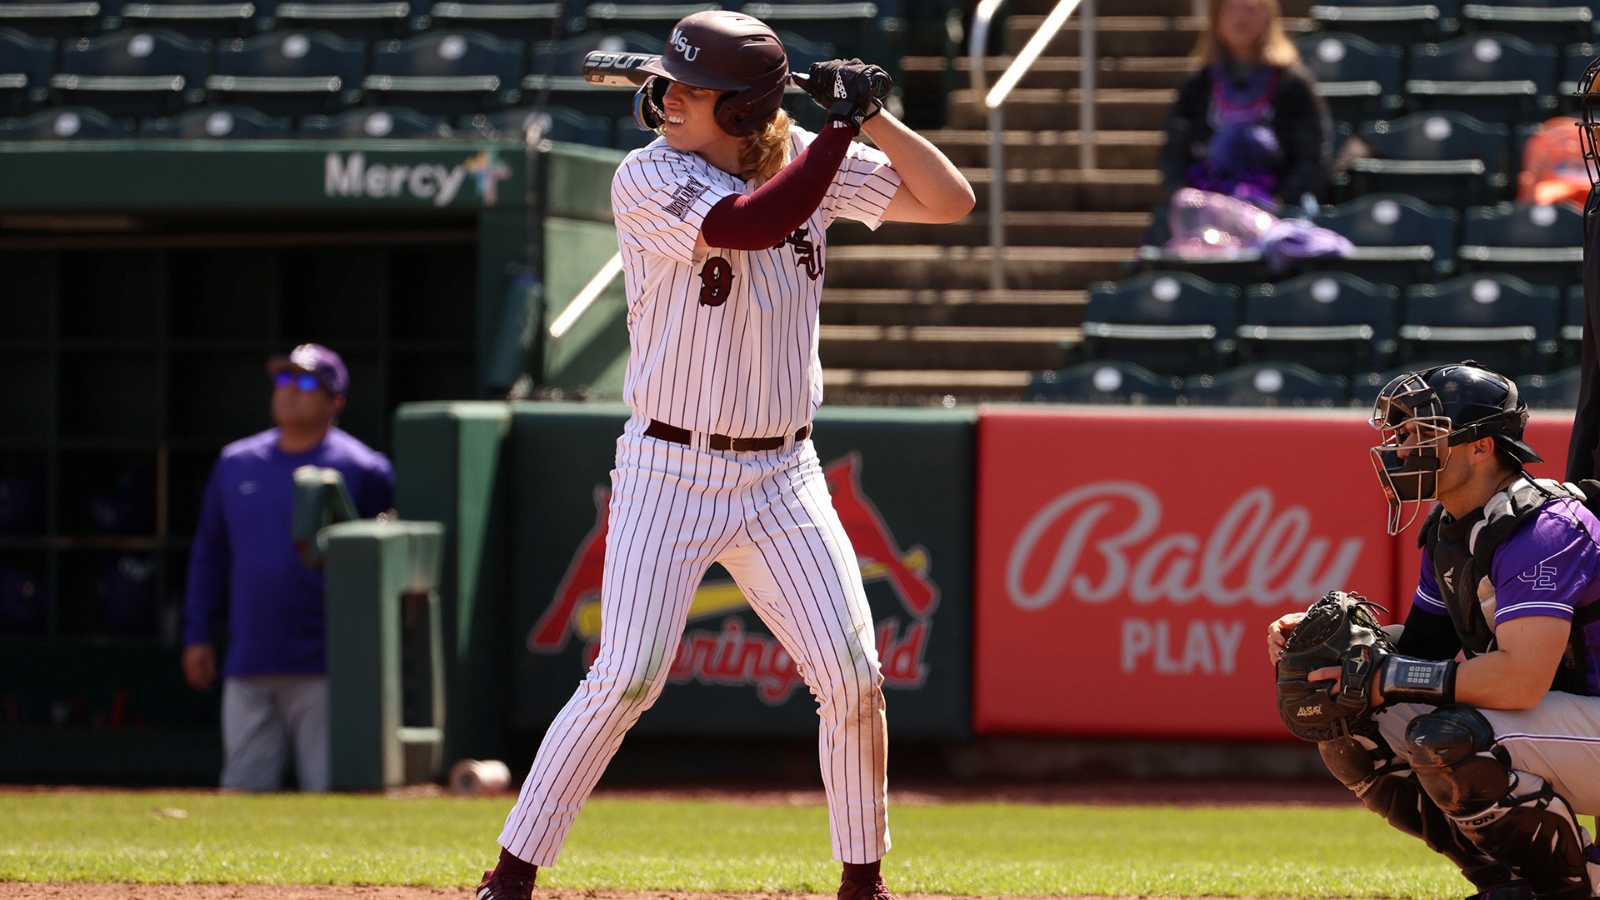 Zack Stewart, wearing a Missouri State baseball uniform, prepares to hit the ball during a game.